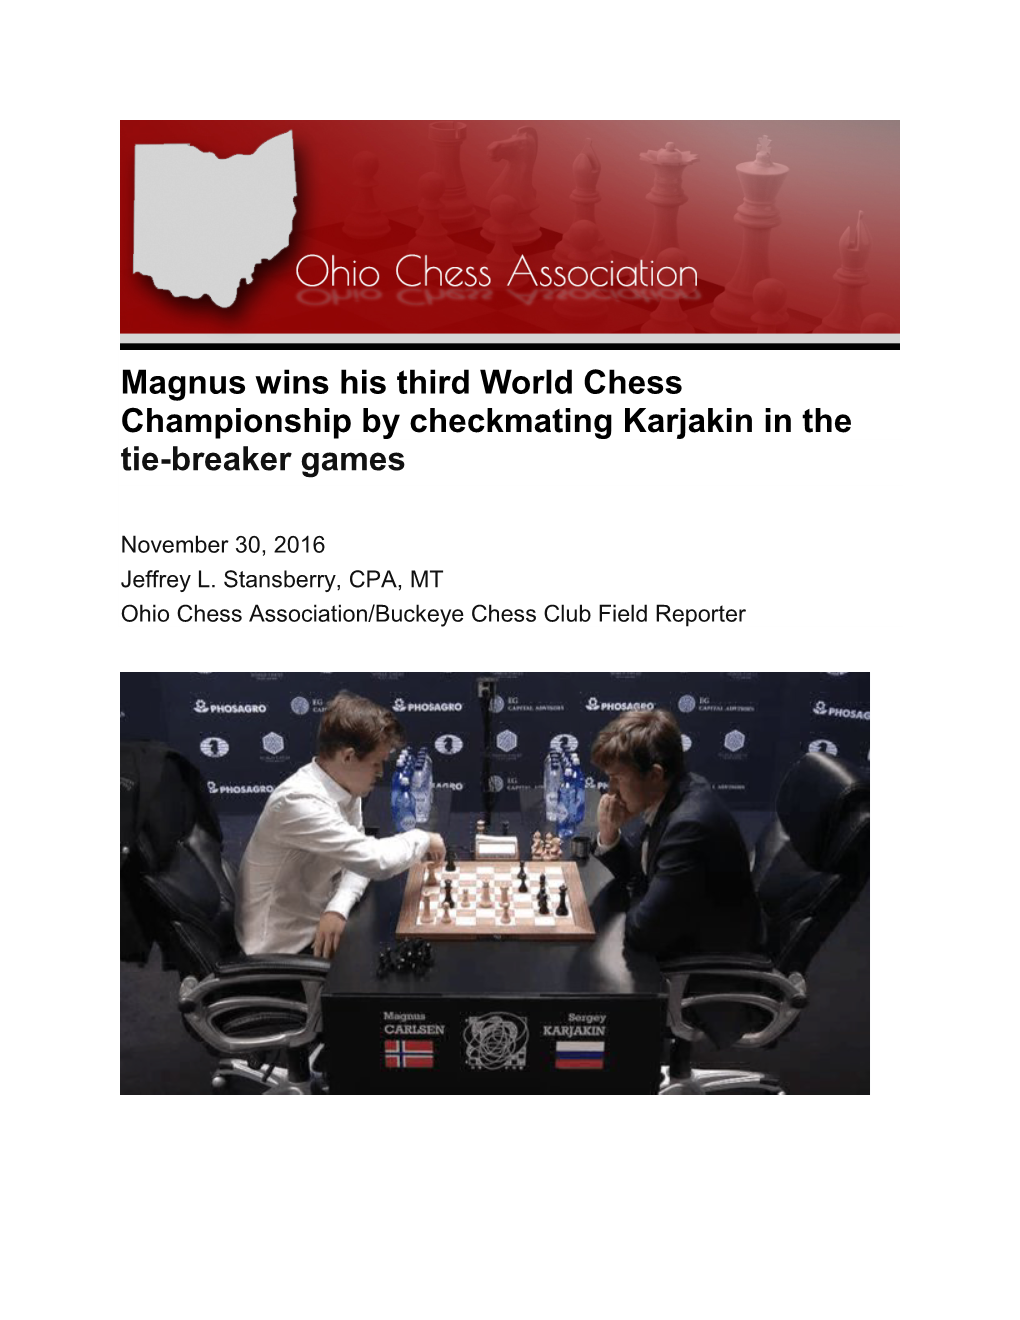 Magnus Wins His Third World Chess Championship by Checkmating Karjakin in the Tie-Breaker Games